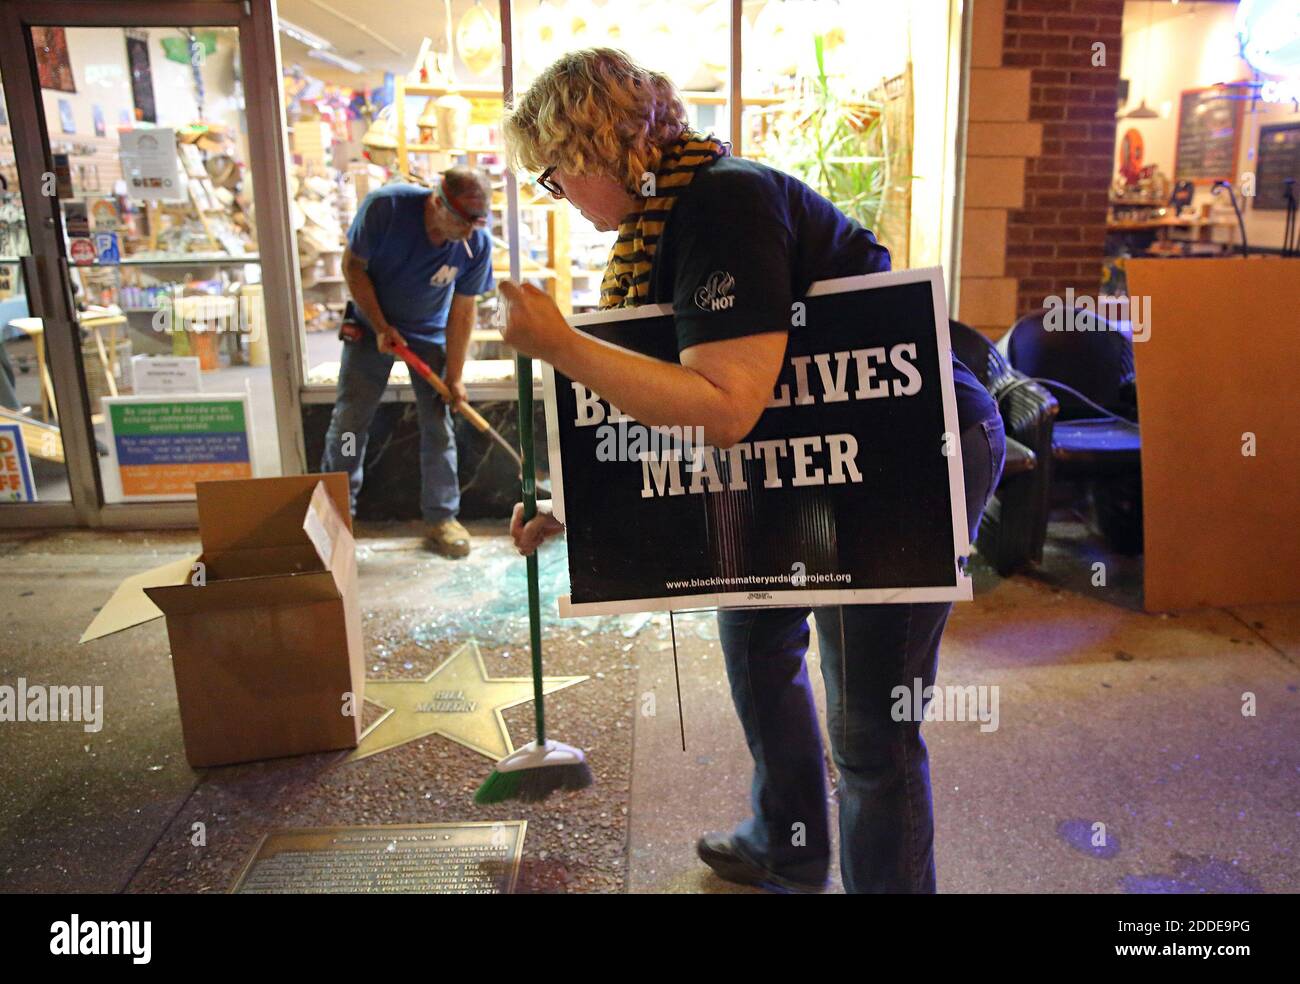 NO FILM, NO VIDEO, NO TV, NO DOCUMENTARY - University City resident Anne Worcester sweeps up broken glass after vandals shattered many windows as a line of police advanced east on Delmar Boulevard to end a protest in University City on Saturday, September 16, 2017. Earlier in the night a large peaceful protest blocked traffic and filled the streets with people. The earlier protest had no property damage and no arrests. But after many of those protesters had left a second more confrontational protest started along Delmar Boulevard. Some people in the crowd threw objects at the police, vandalize Stock Photo